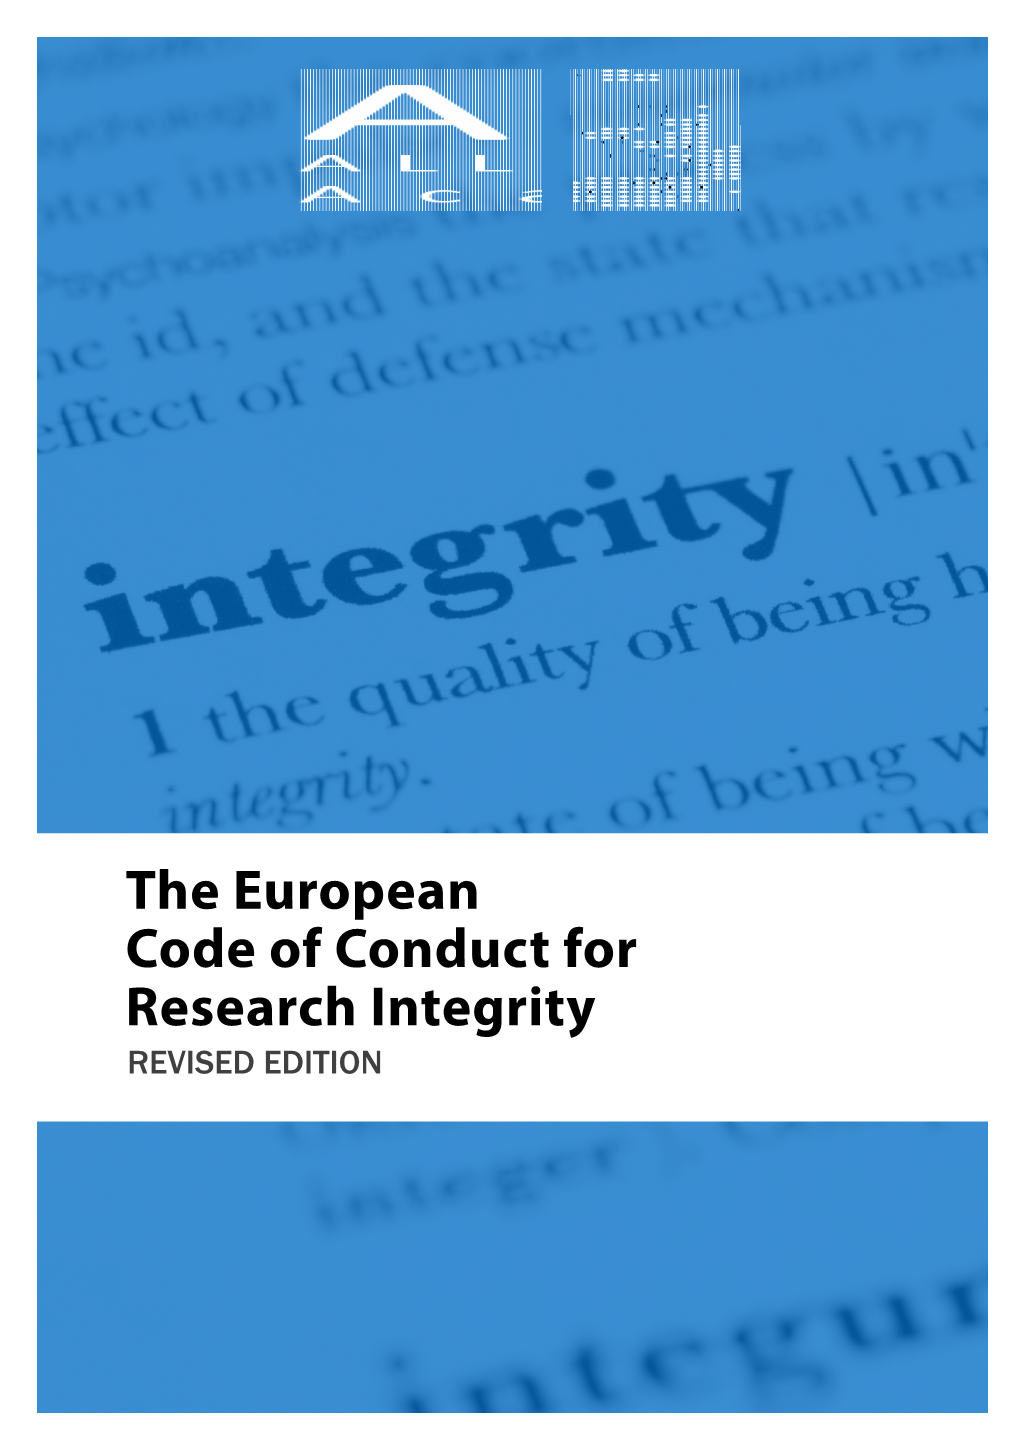 The European Code of Conduct for Research Integrity REVISED EDITION !E European Code of Conduct for Research Integrity Revised Edition